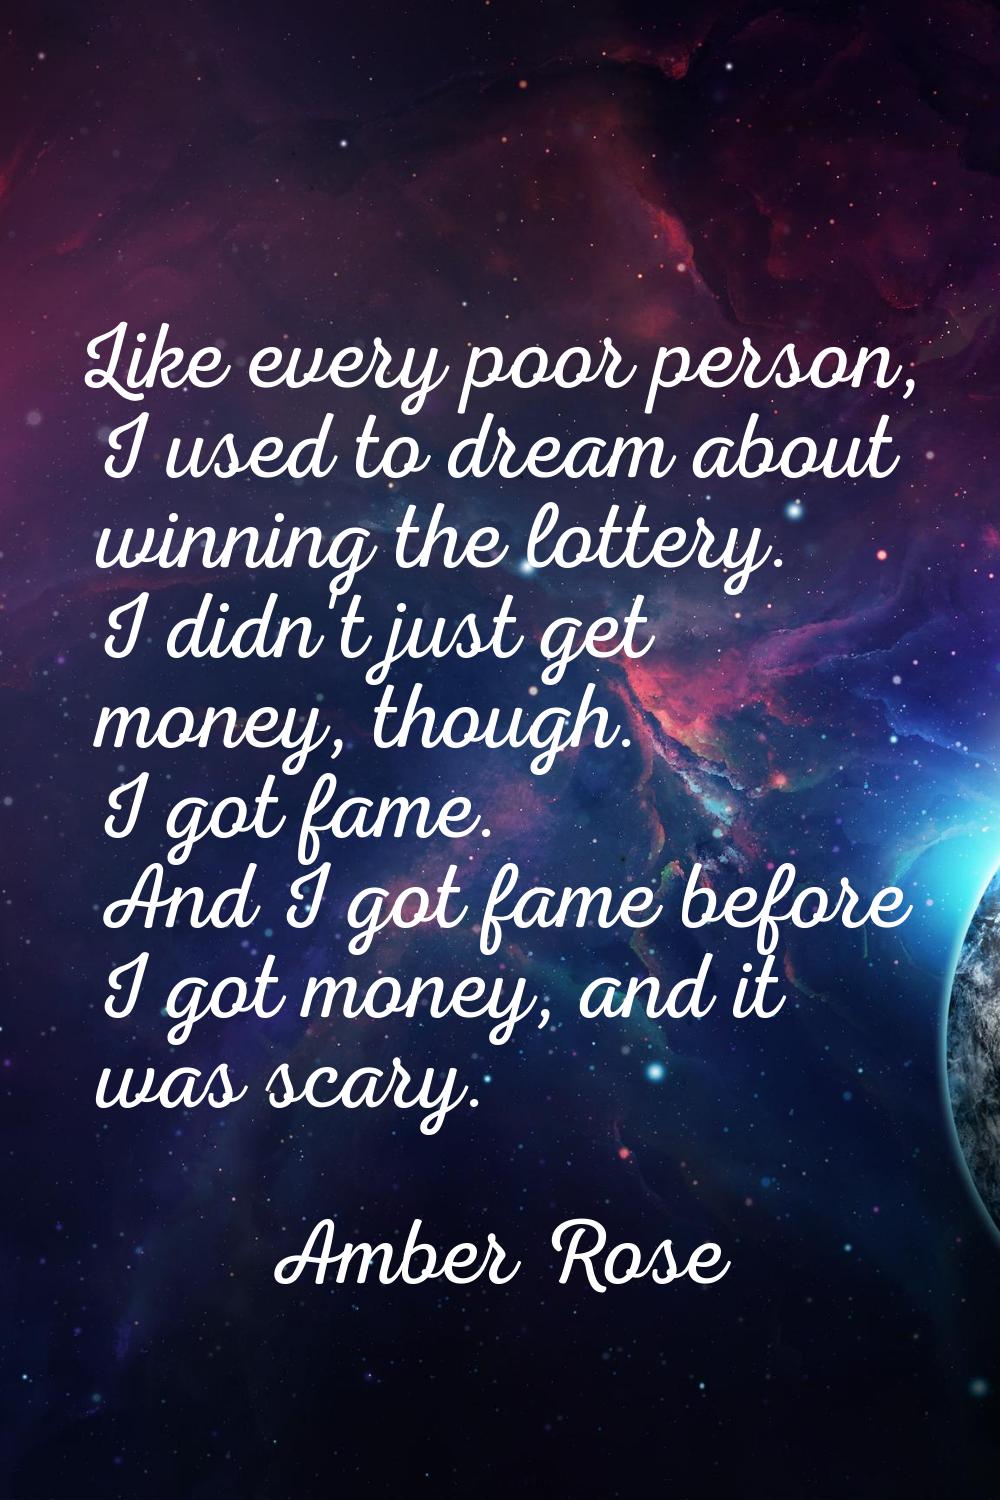 Like every poor person, I used to dream about winning the lottery. I didn't just get money, though.